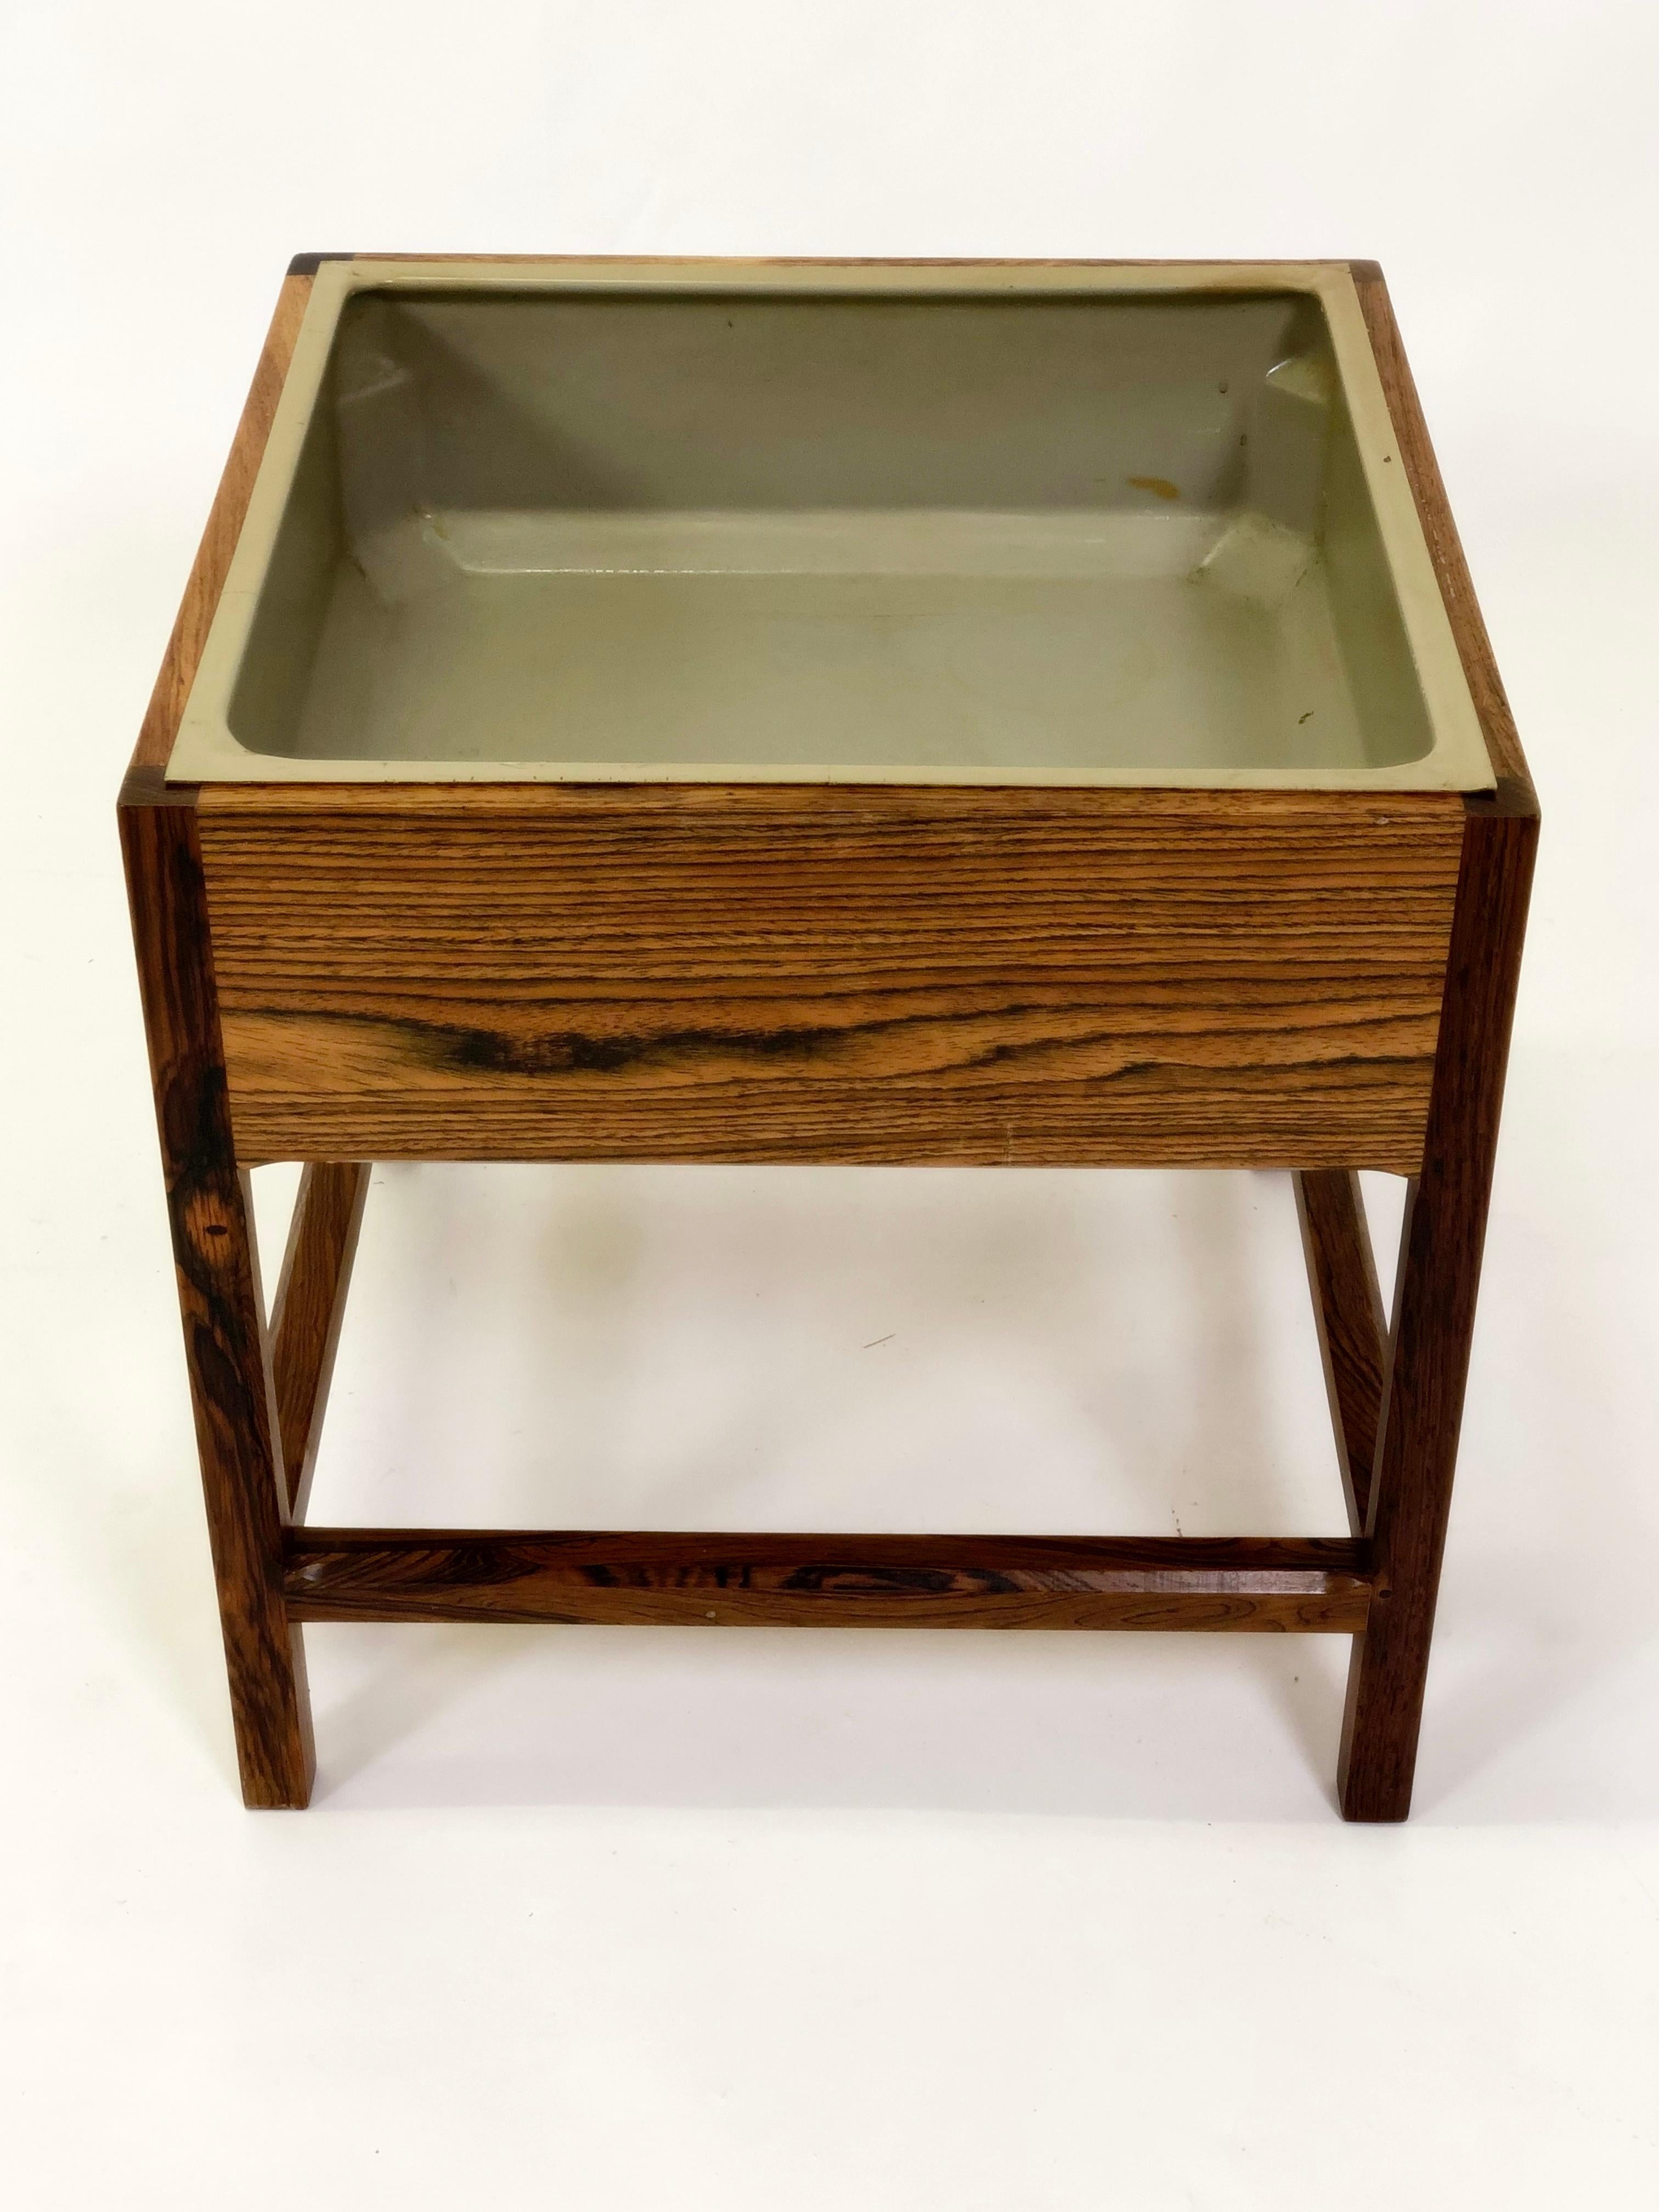 1960s Kai Kristiansen rosewood planter by Aksel Kjaersgaard.

The planter has been overlooked by our cabinetmaker and is in very good condition.